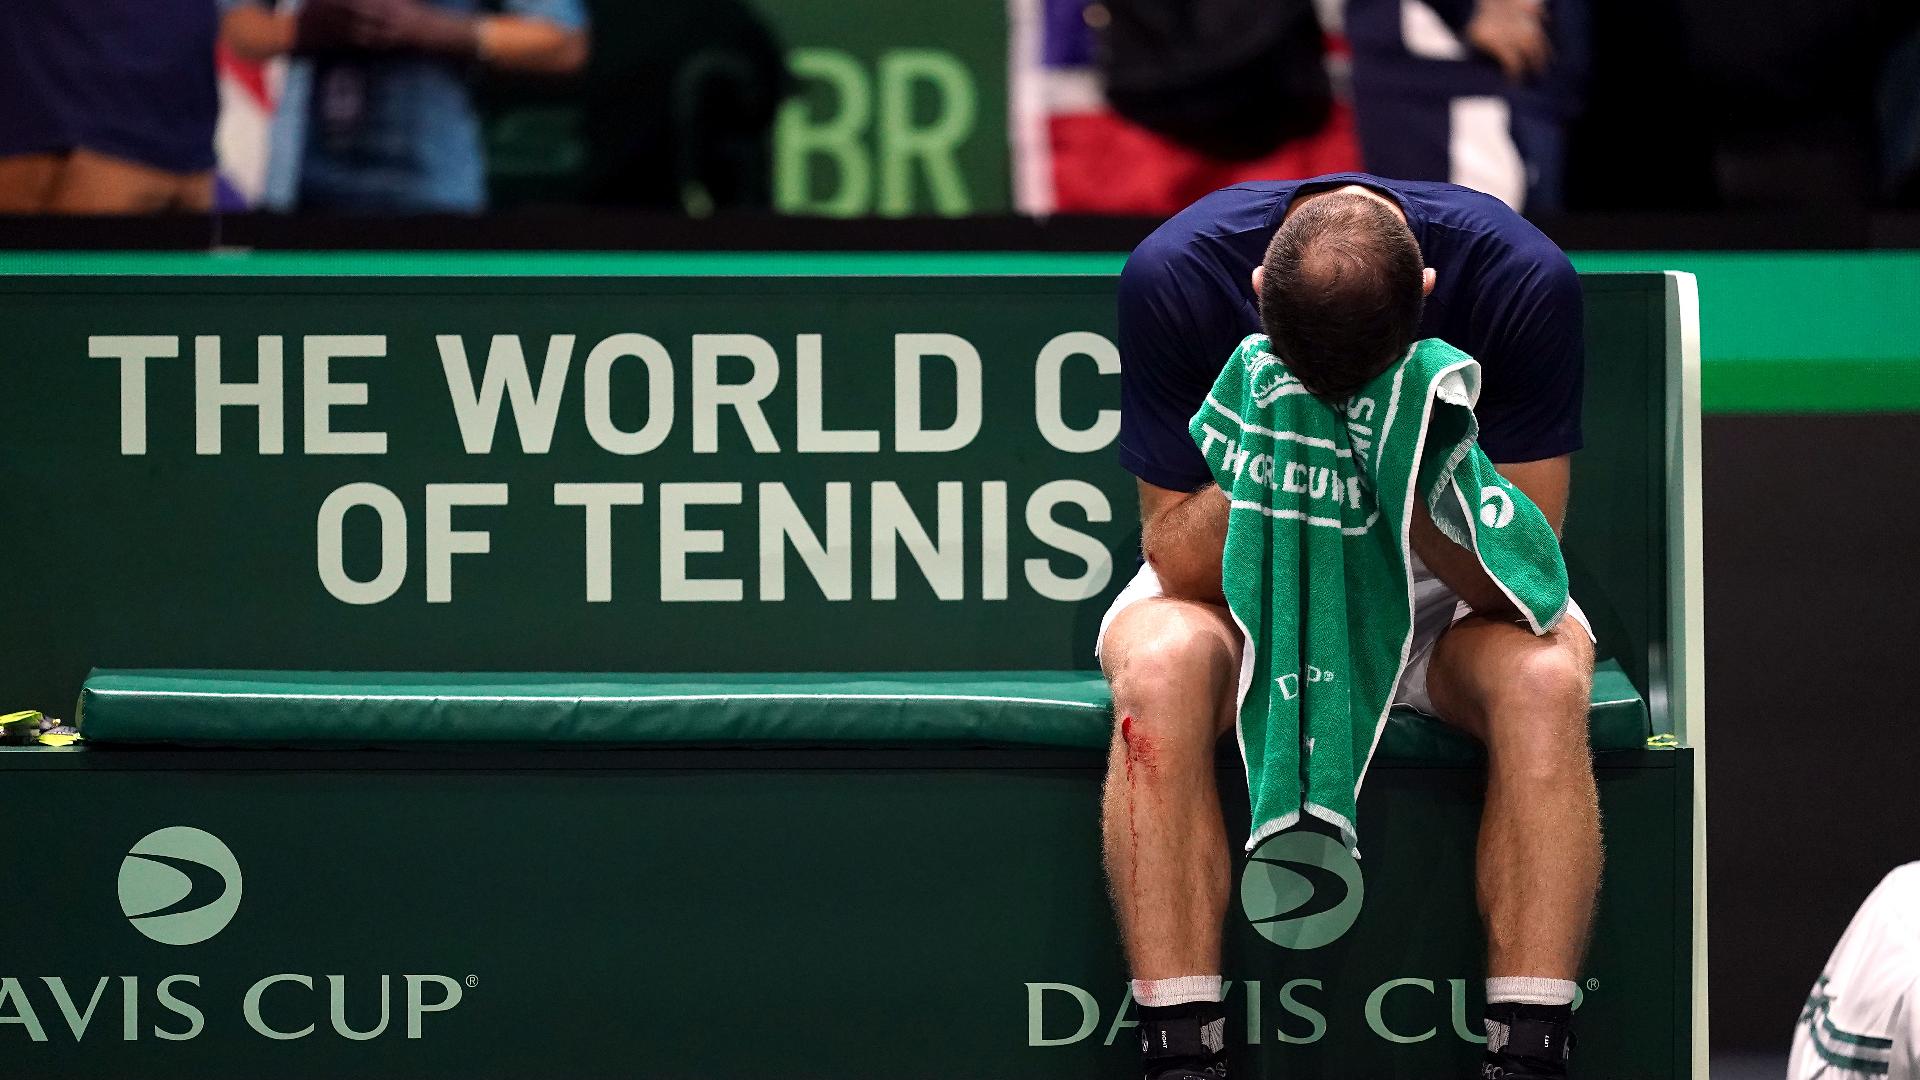 Tearful Andy Murray reveals added significance of come-from-behind Davis Cup win